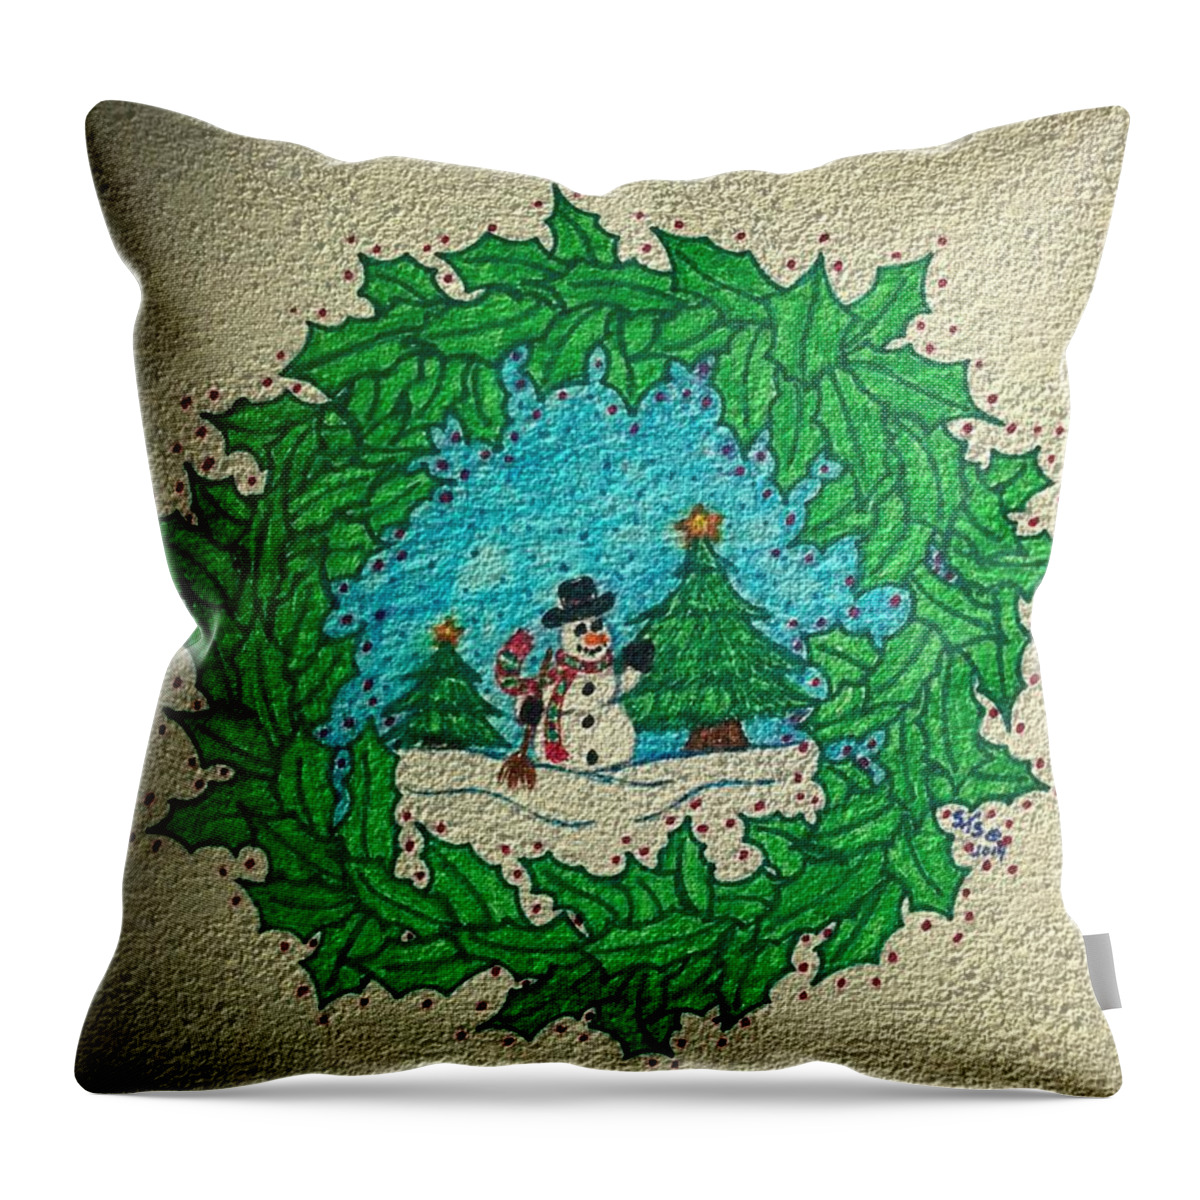 Christmas Throw Pillow featuring the drawing Christmas Wreath by Susan Turner Soulis